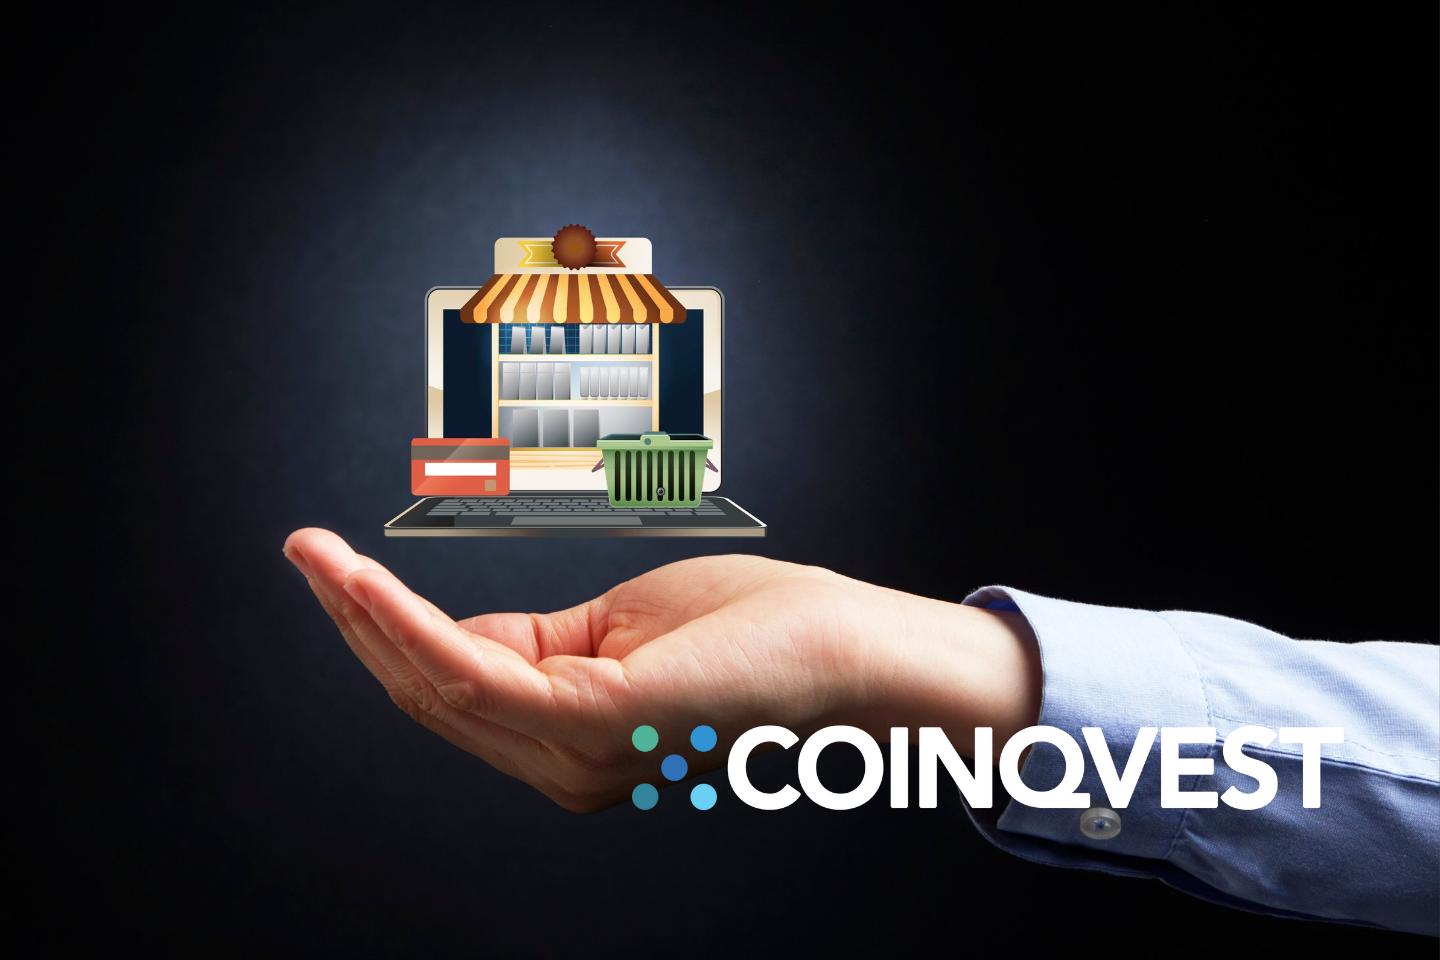 How Ecommerce Will Be Revolutionized by Blockchain Technology